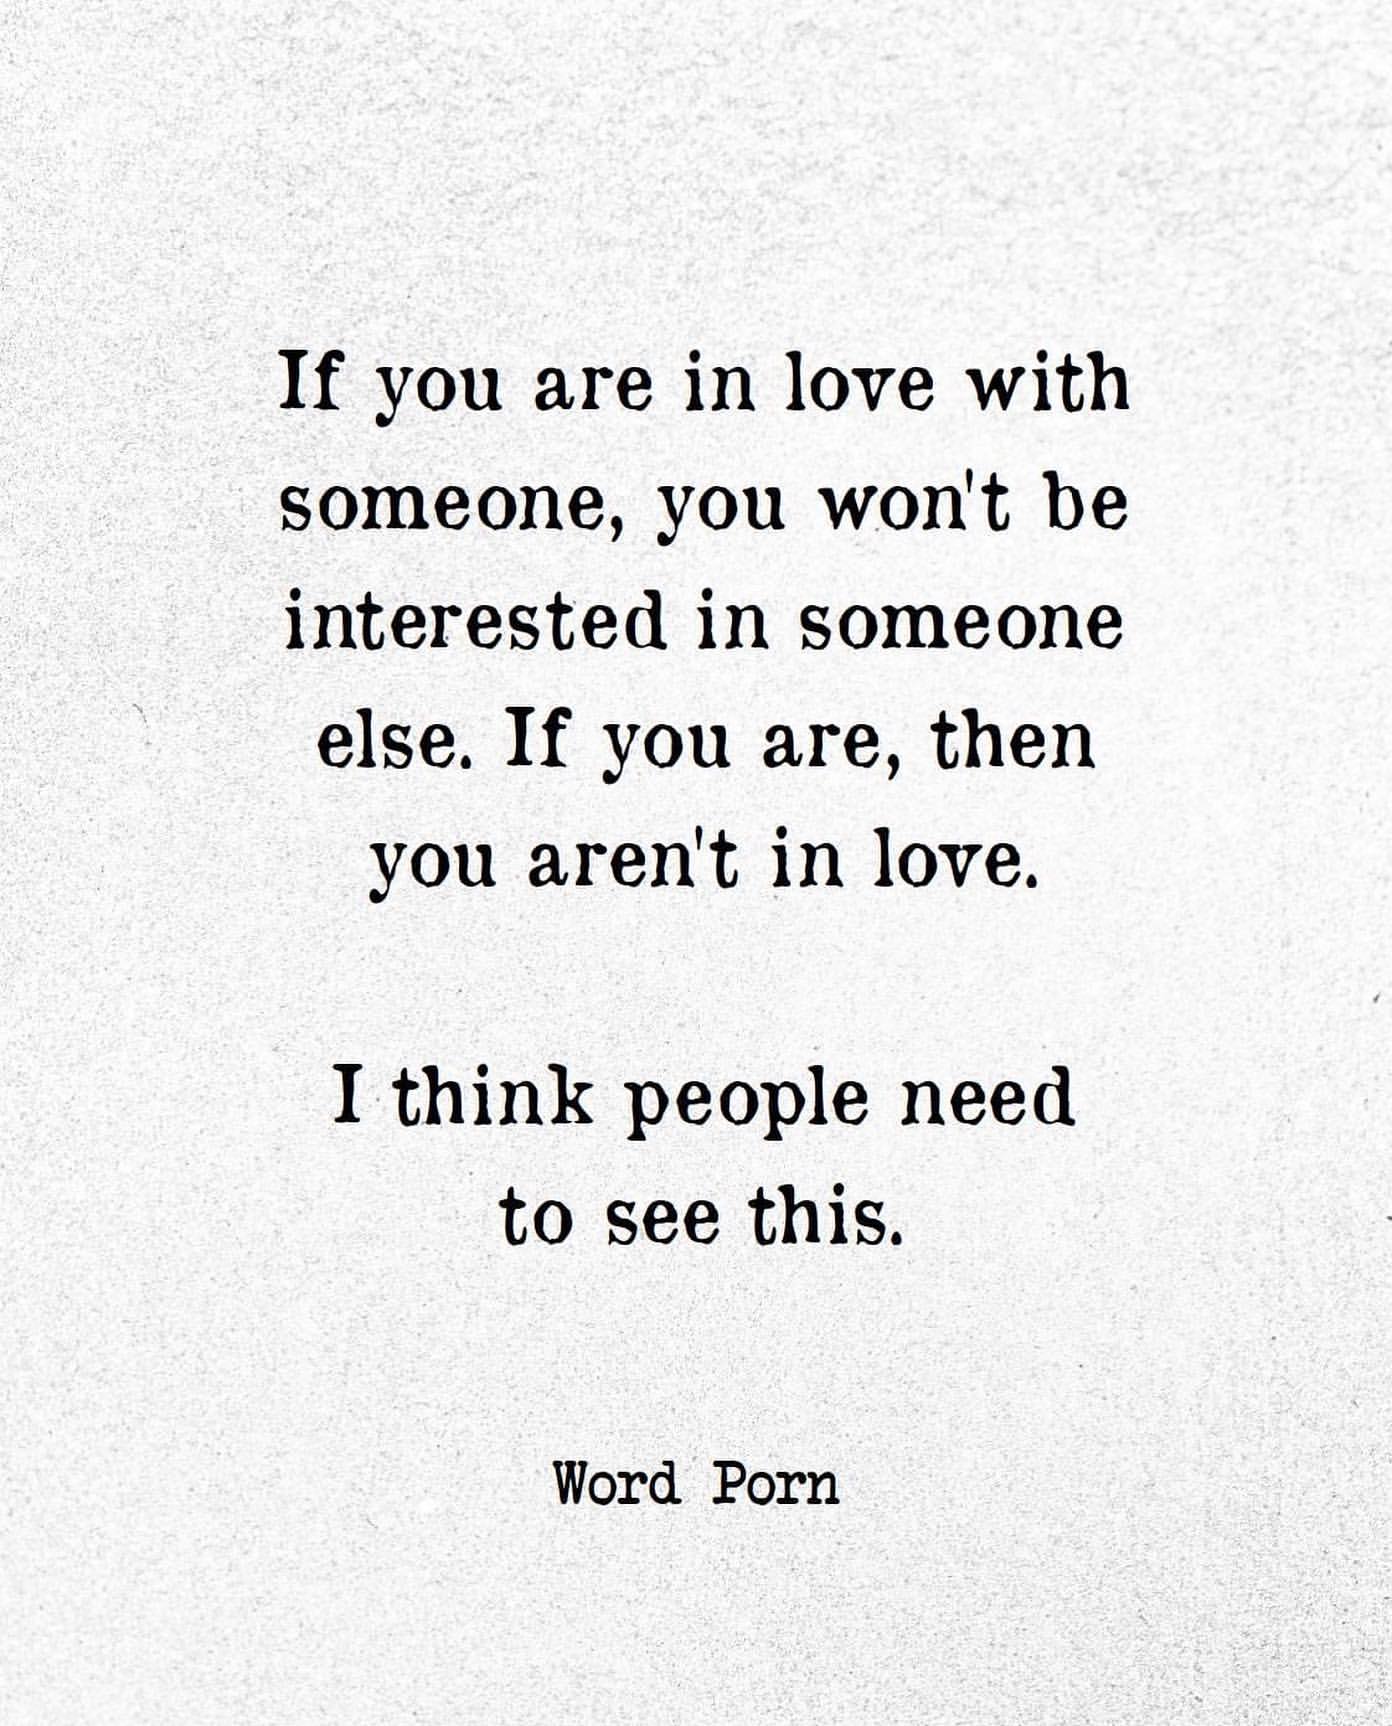 If you are in love with someone, you won't be interested in someone else. If you are, then you aren't in love. I think people need to see this.